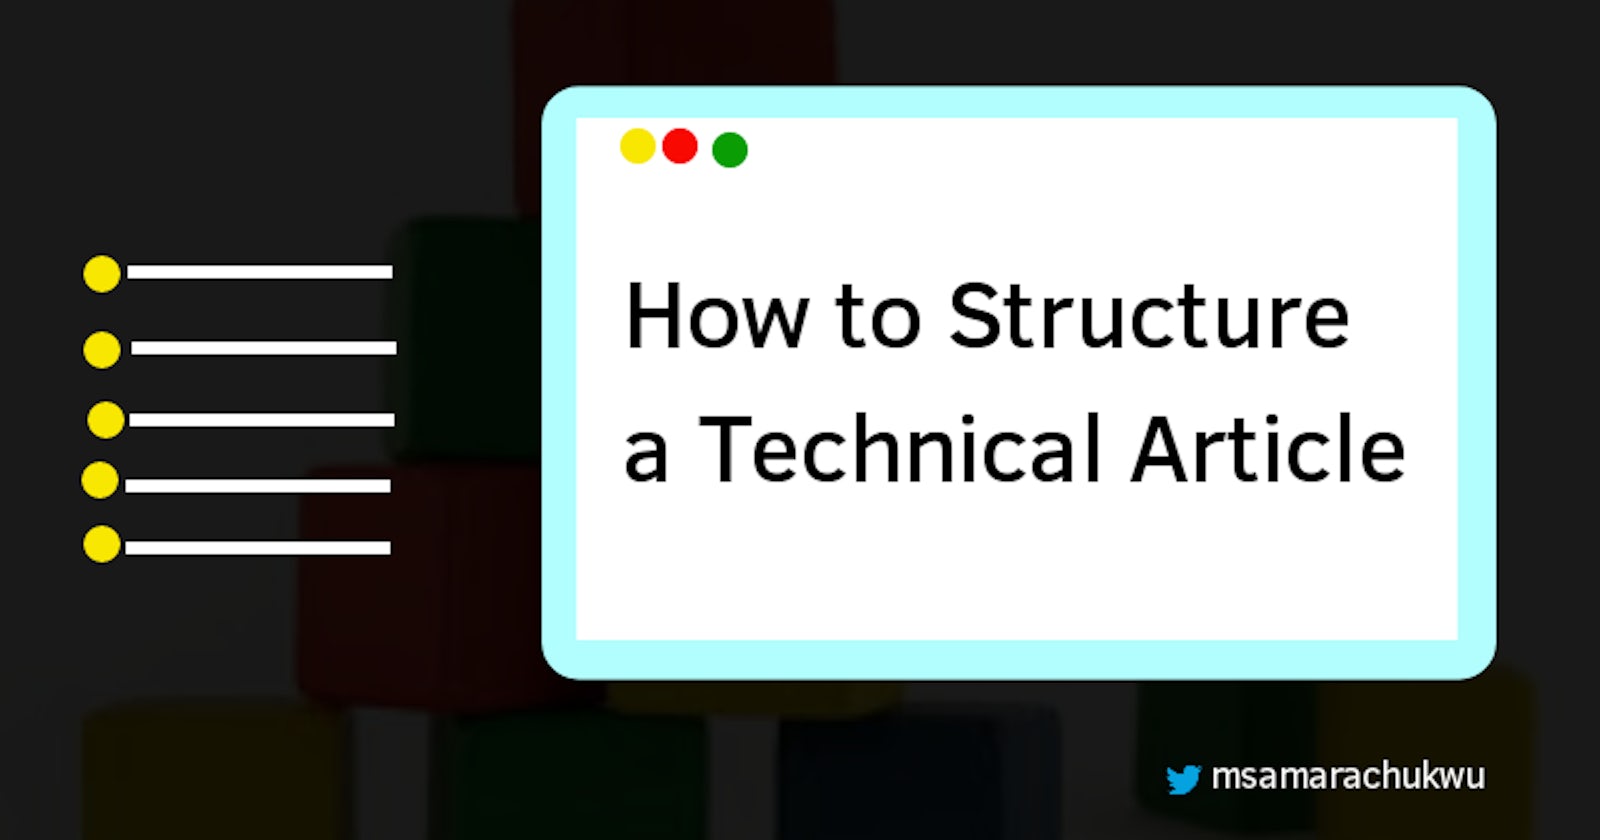 How to Structure a Technical Article